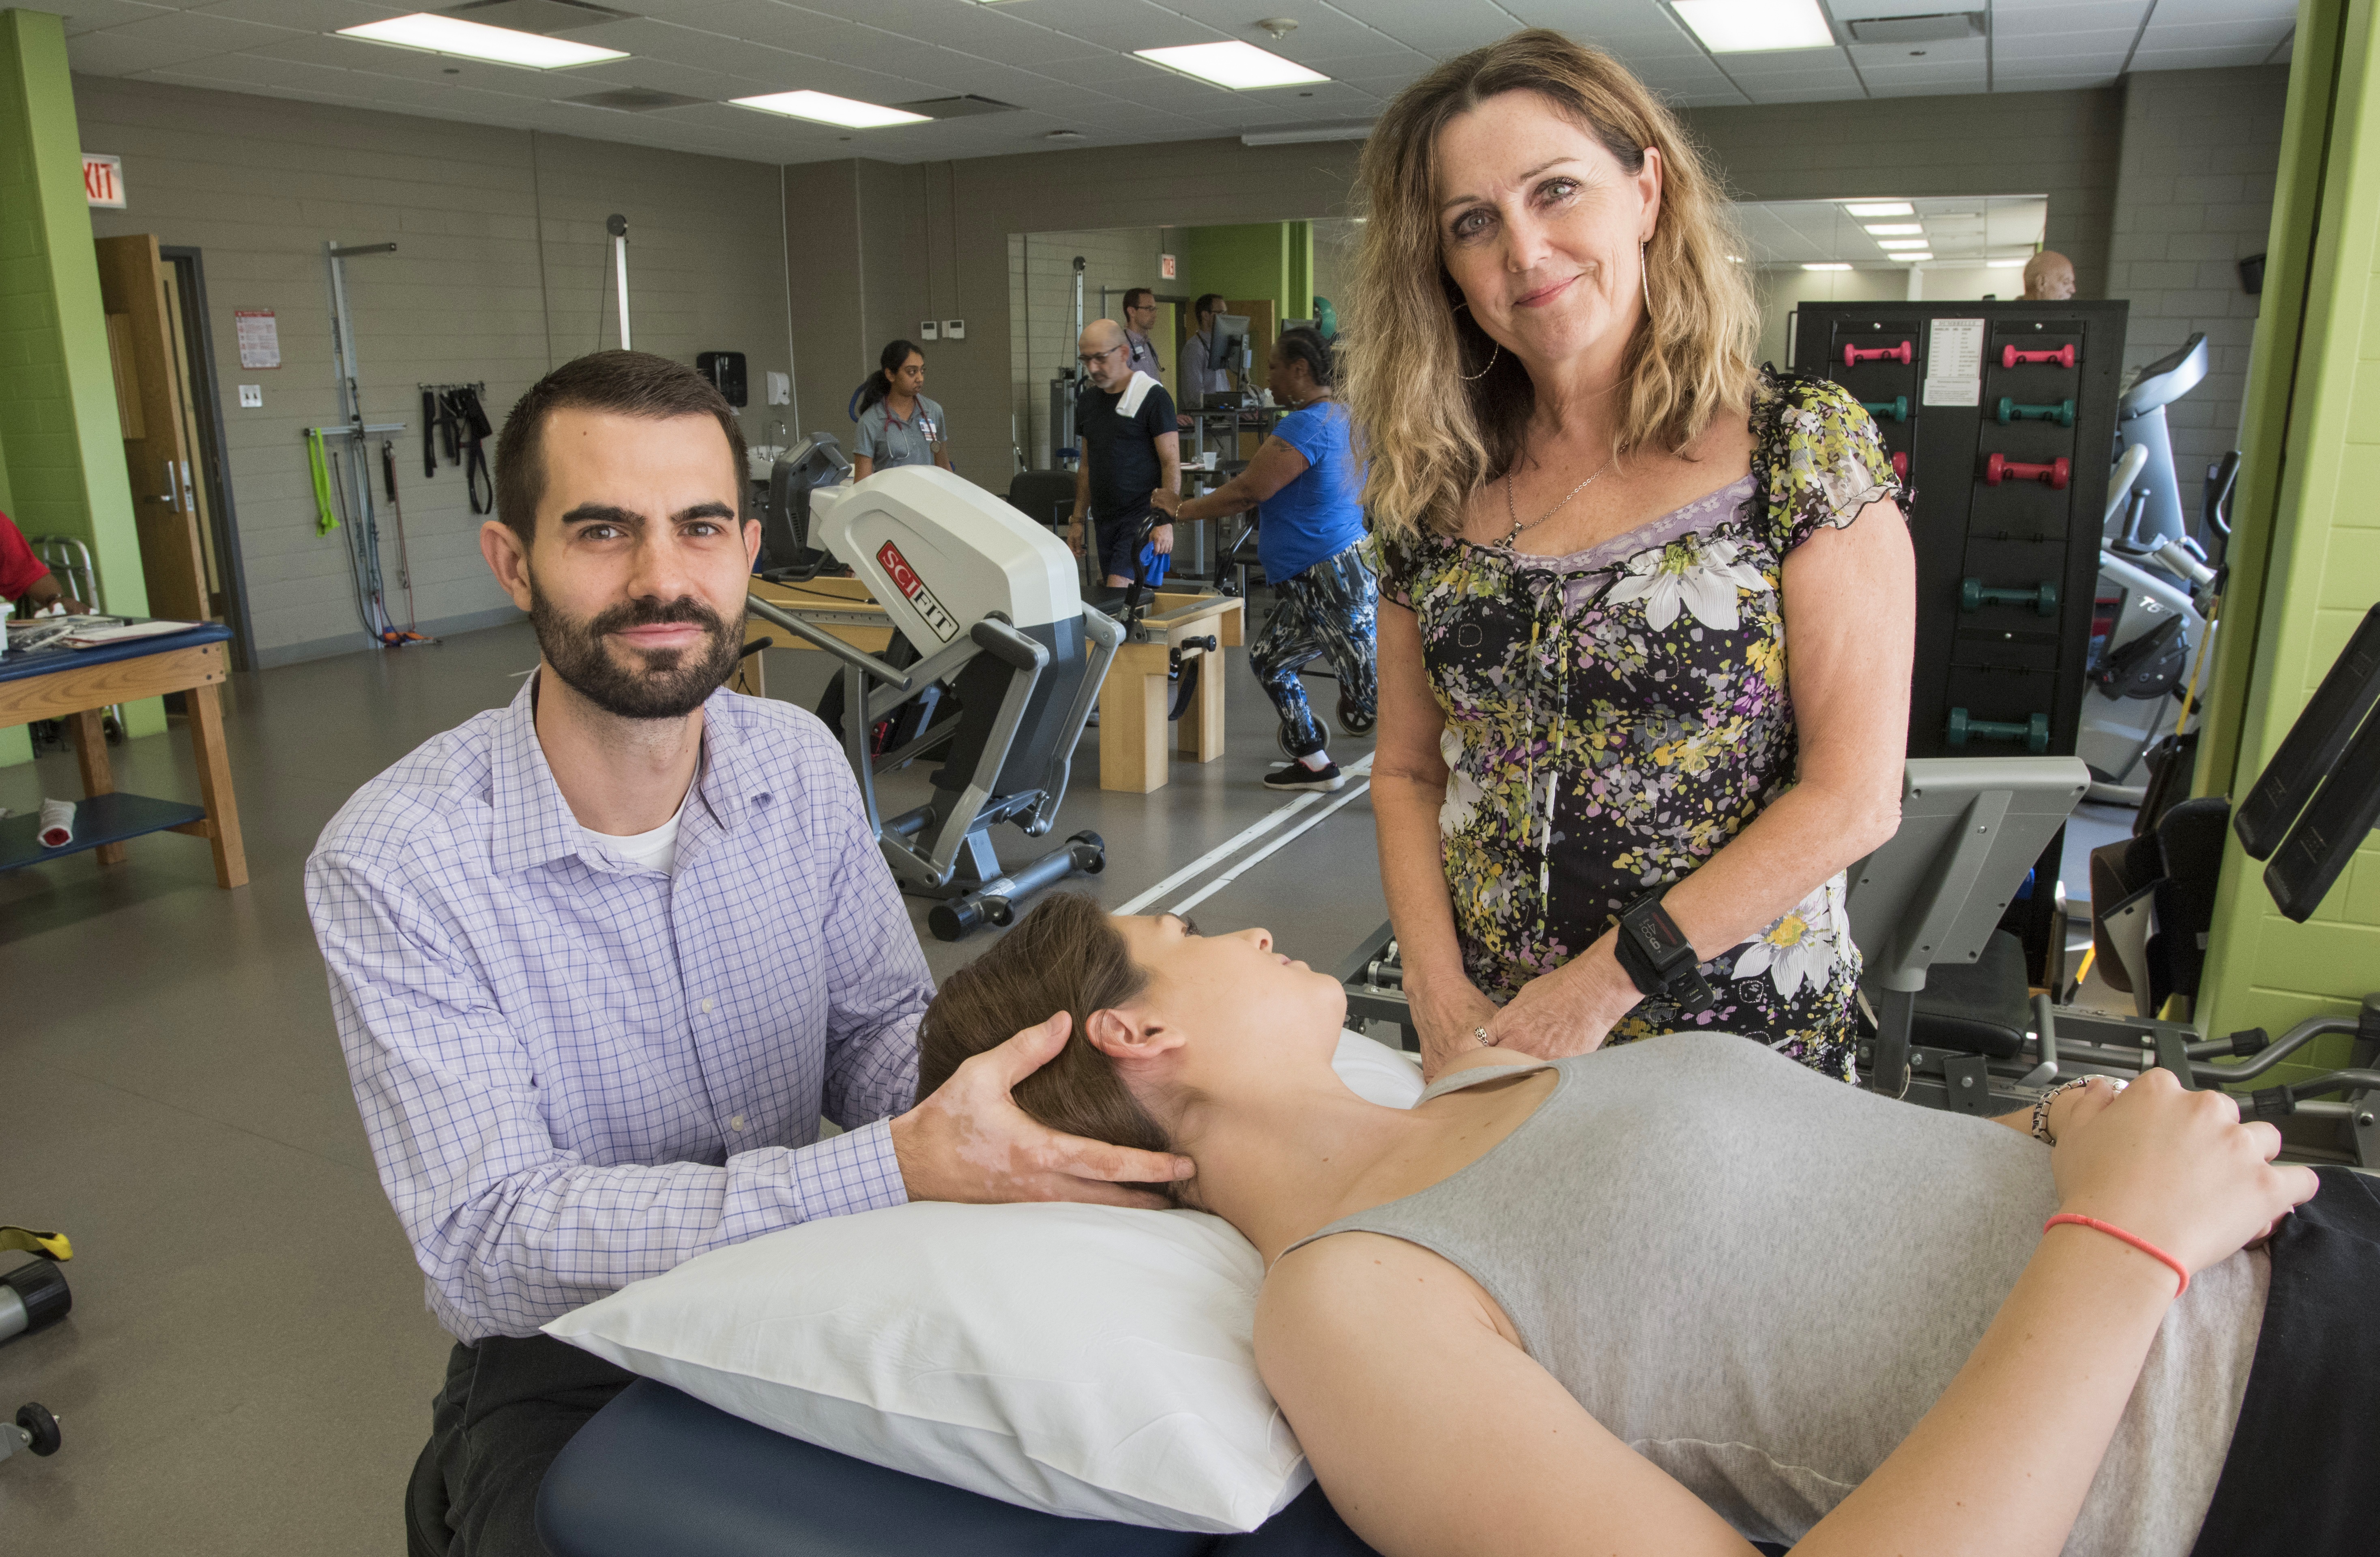 Adam Wielechowski (left) and Deb Davey (right) are working to educate physicians on how physical therapy can be an effective alternative to prescribing opioids.